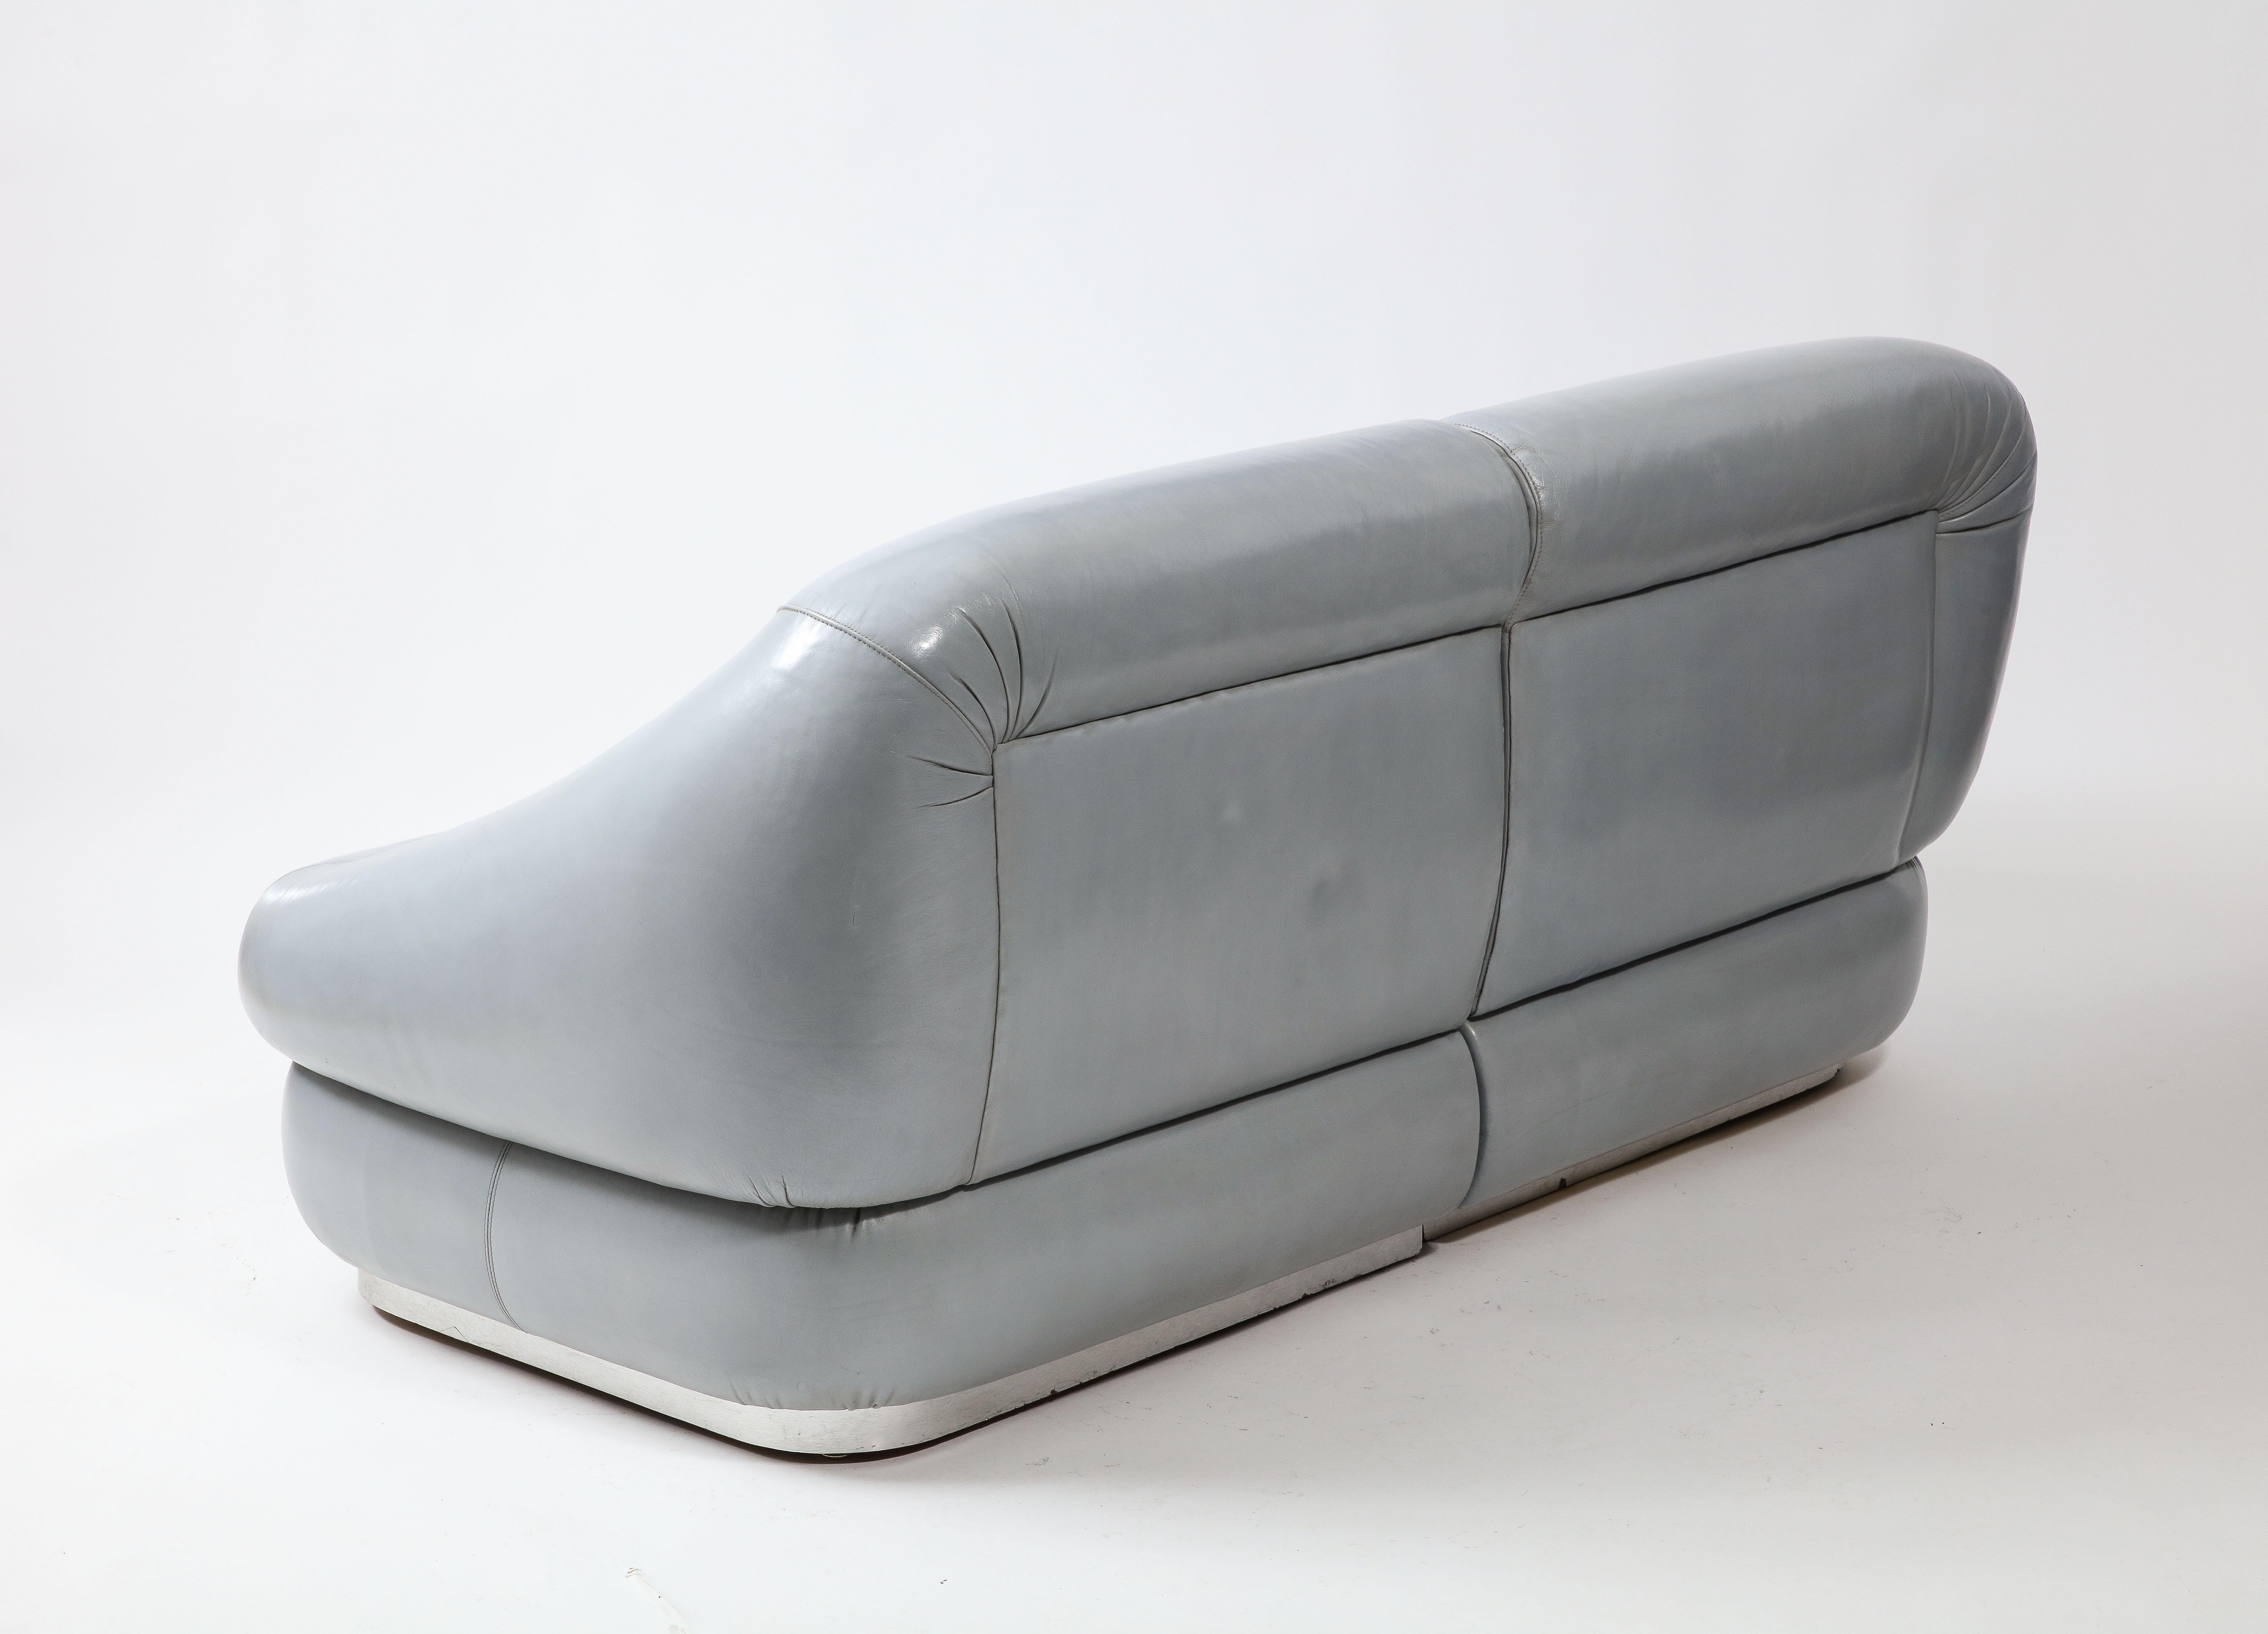 Cantu Grey Leather Settee, Italy 1970's For Sale 3